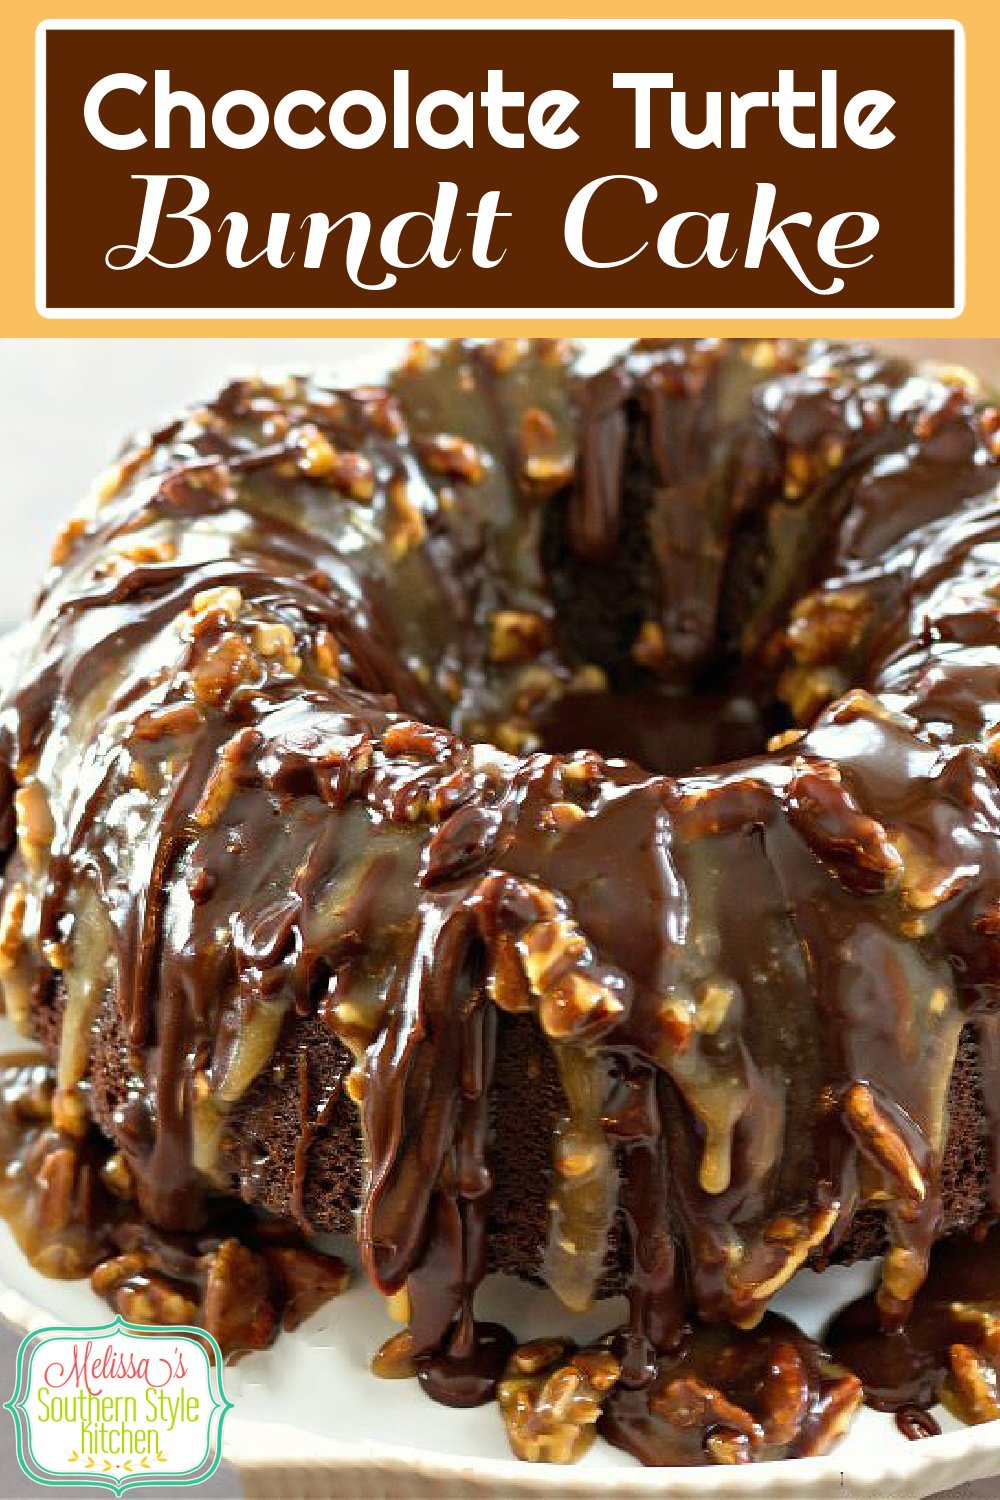 This stunning Chocolate Turtle Bundt Cake is is drizzled with a buttery homemade pecan-caramel sauce and fudgy chocolate ganache #turtlecake #turtlebundtcake #chocolatecakerecipes #chocolatecake